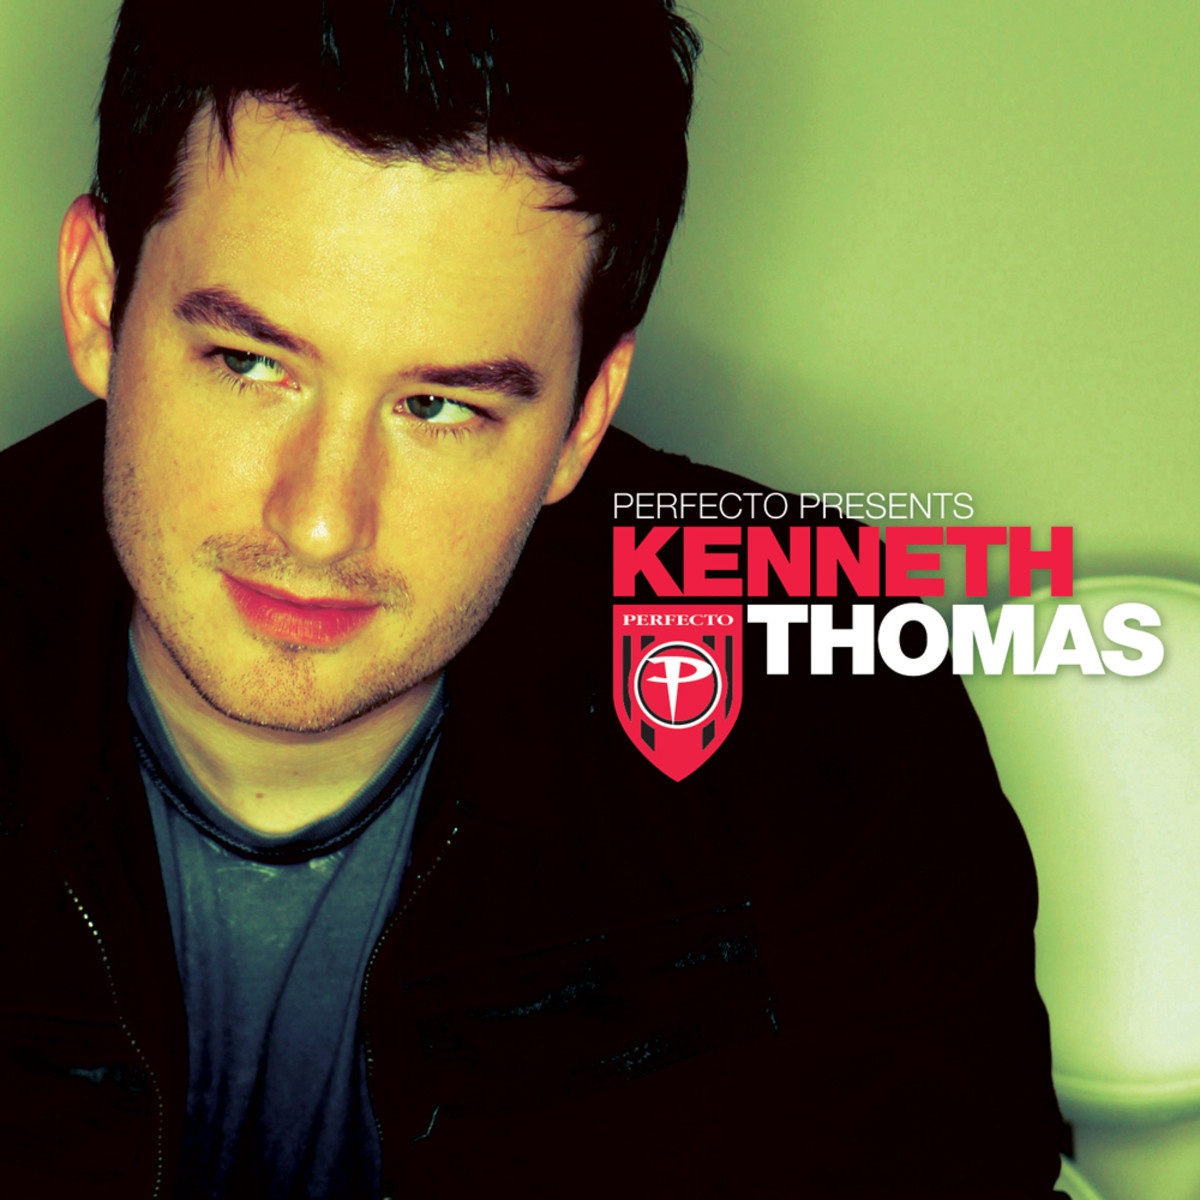 Perfecto presents Kenneth Thomas - The Full Versions